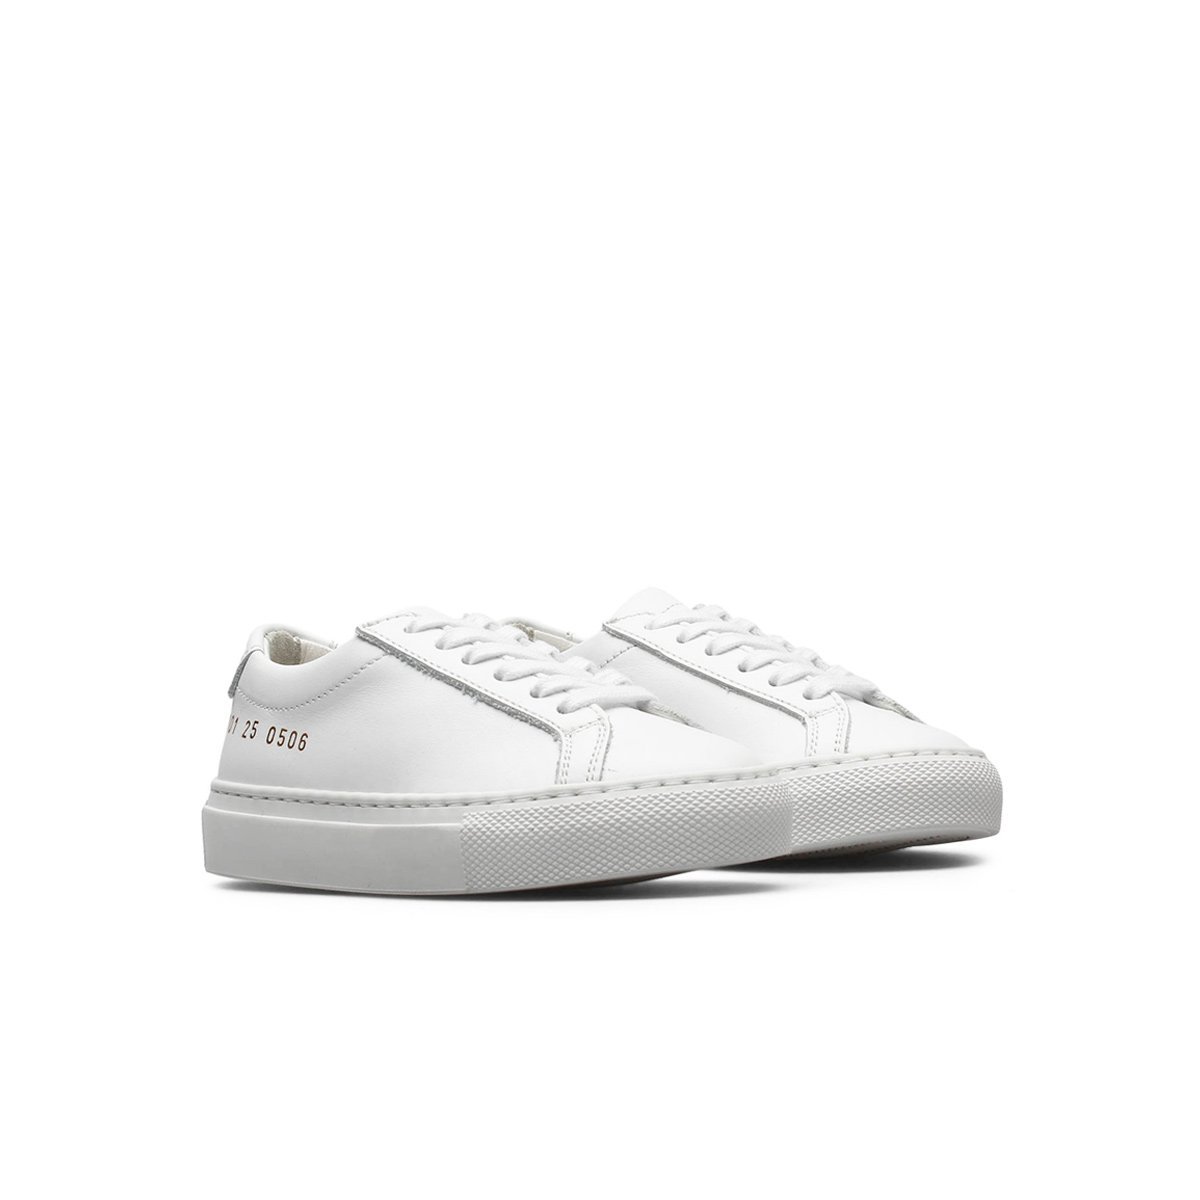 Common Projects Shoes ORIGINAL ACHILLES LOW (YOUTH)